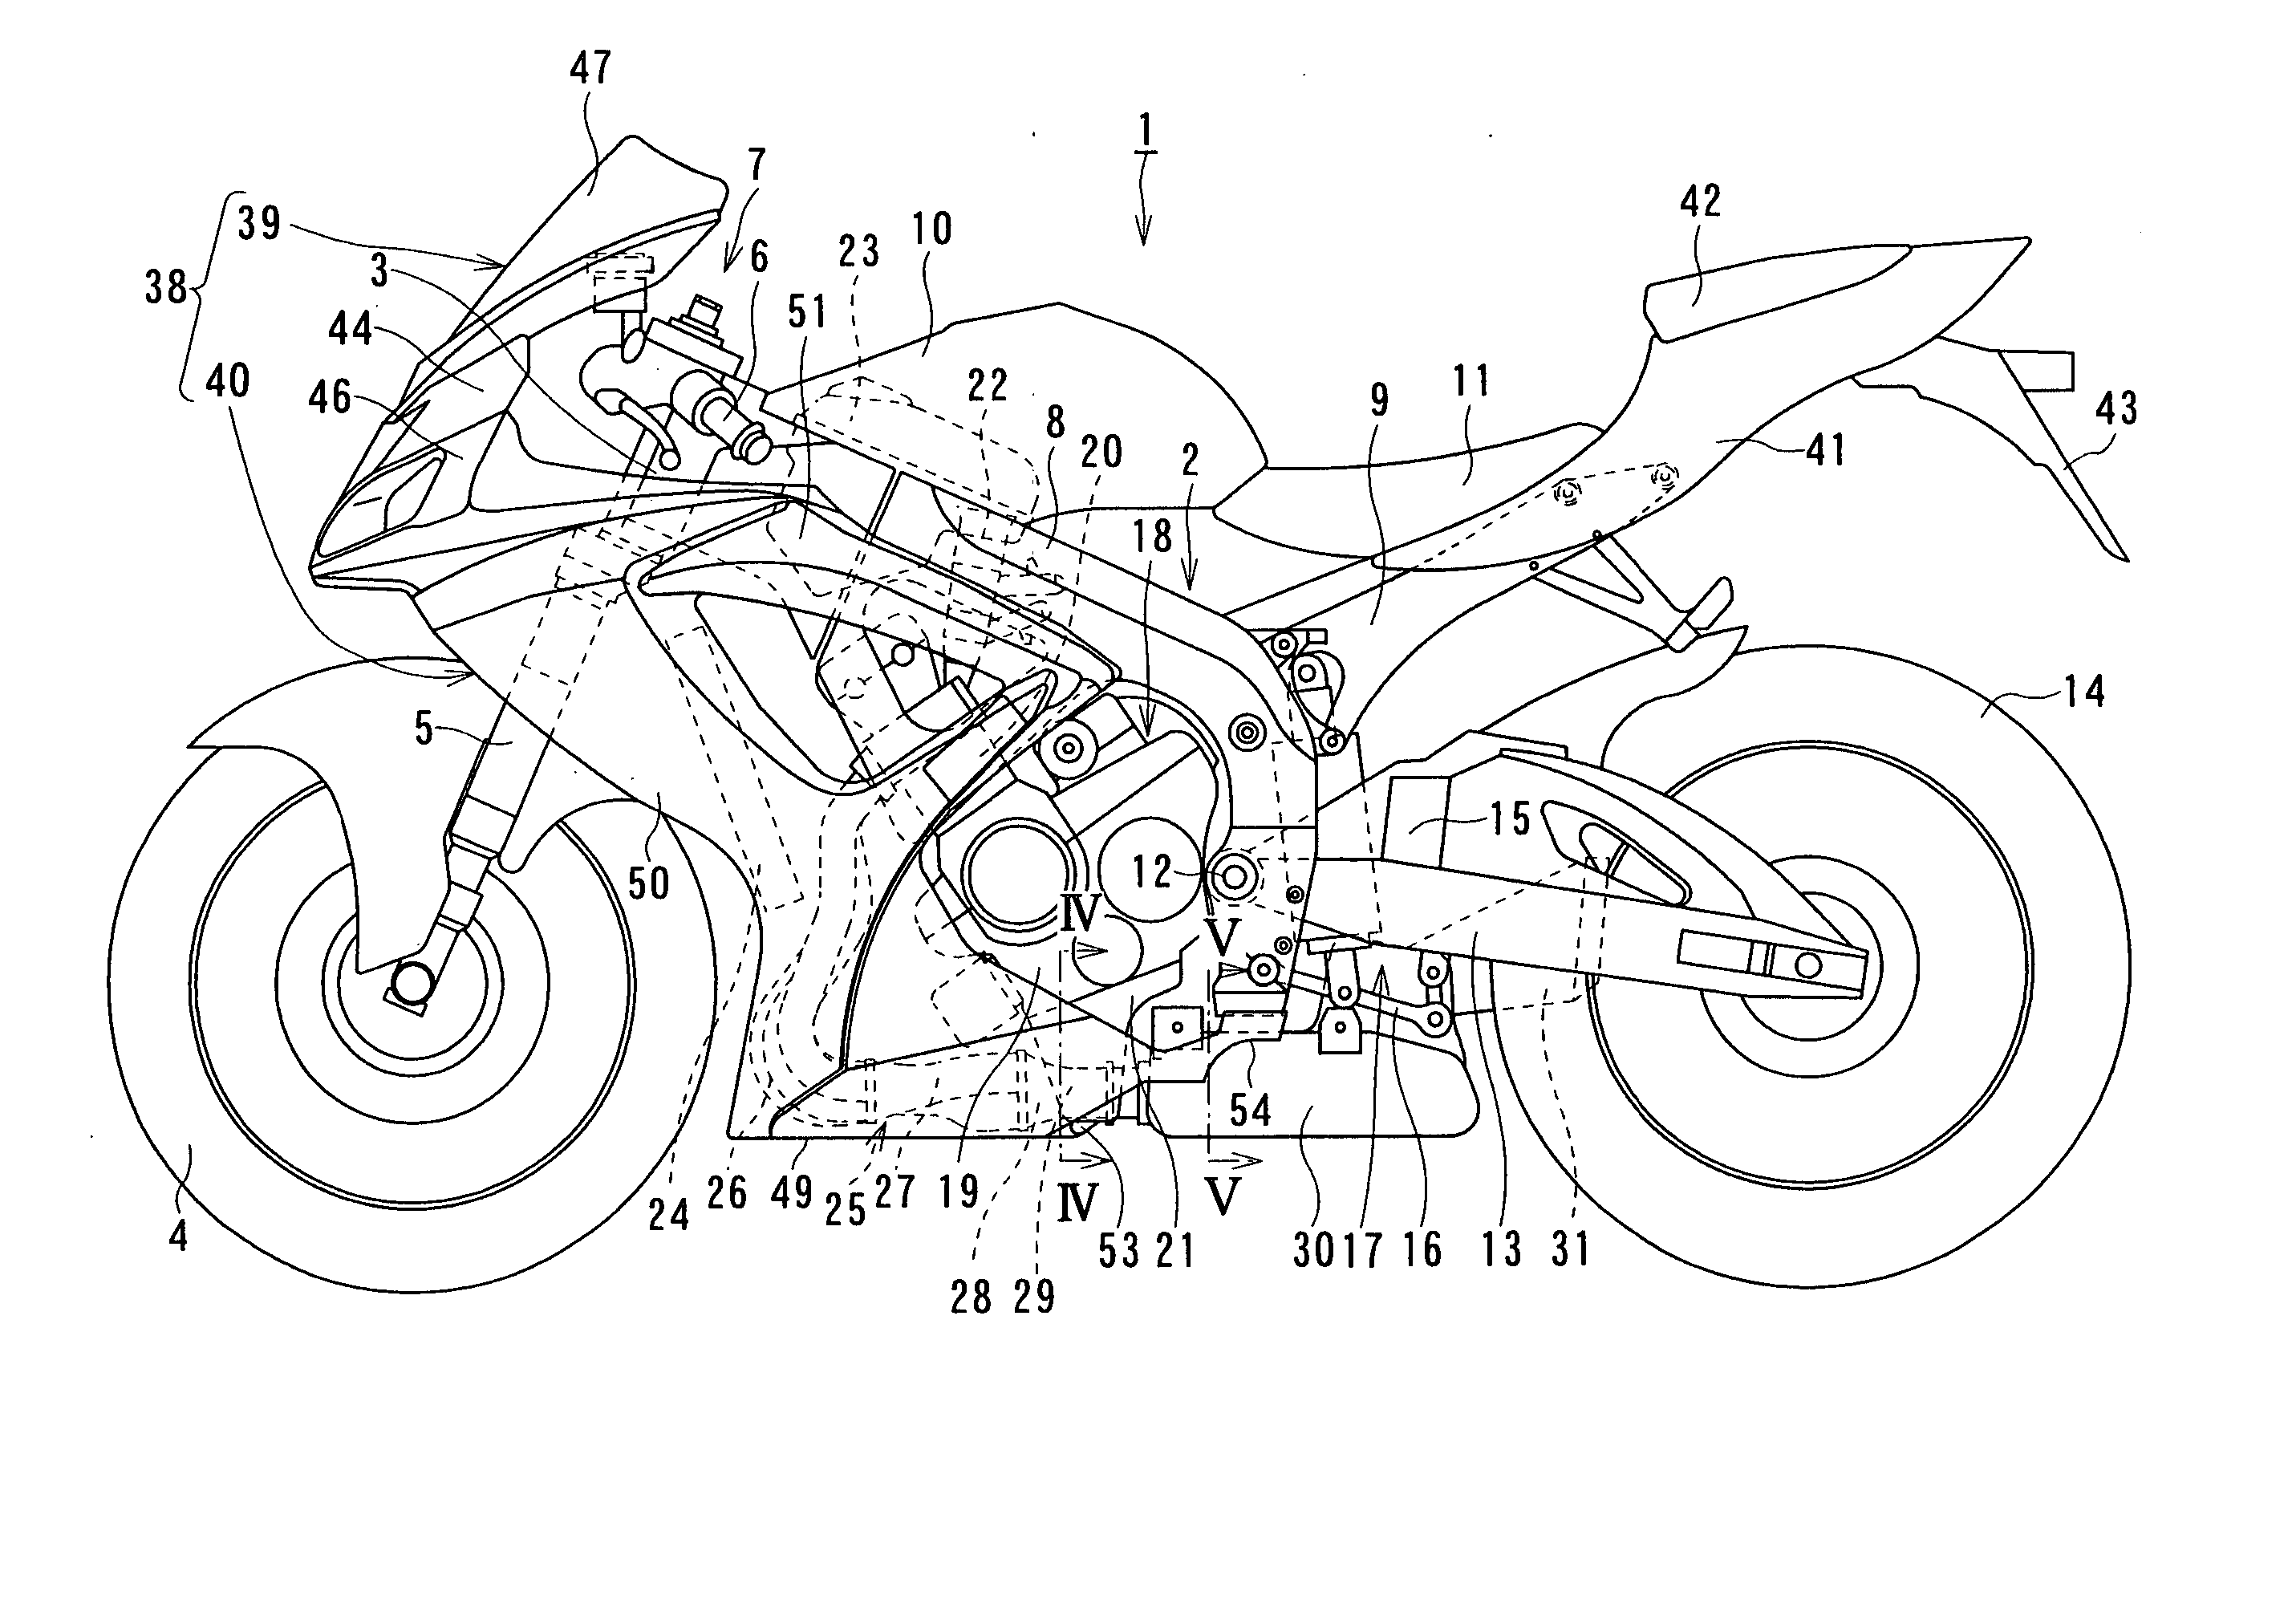 Cowling of motorcycle